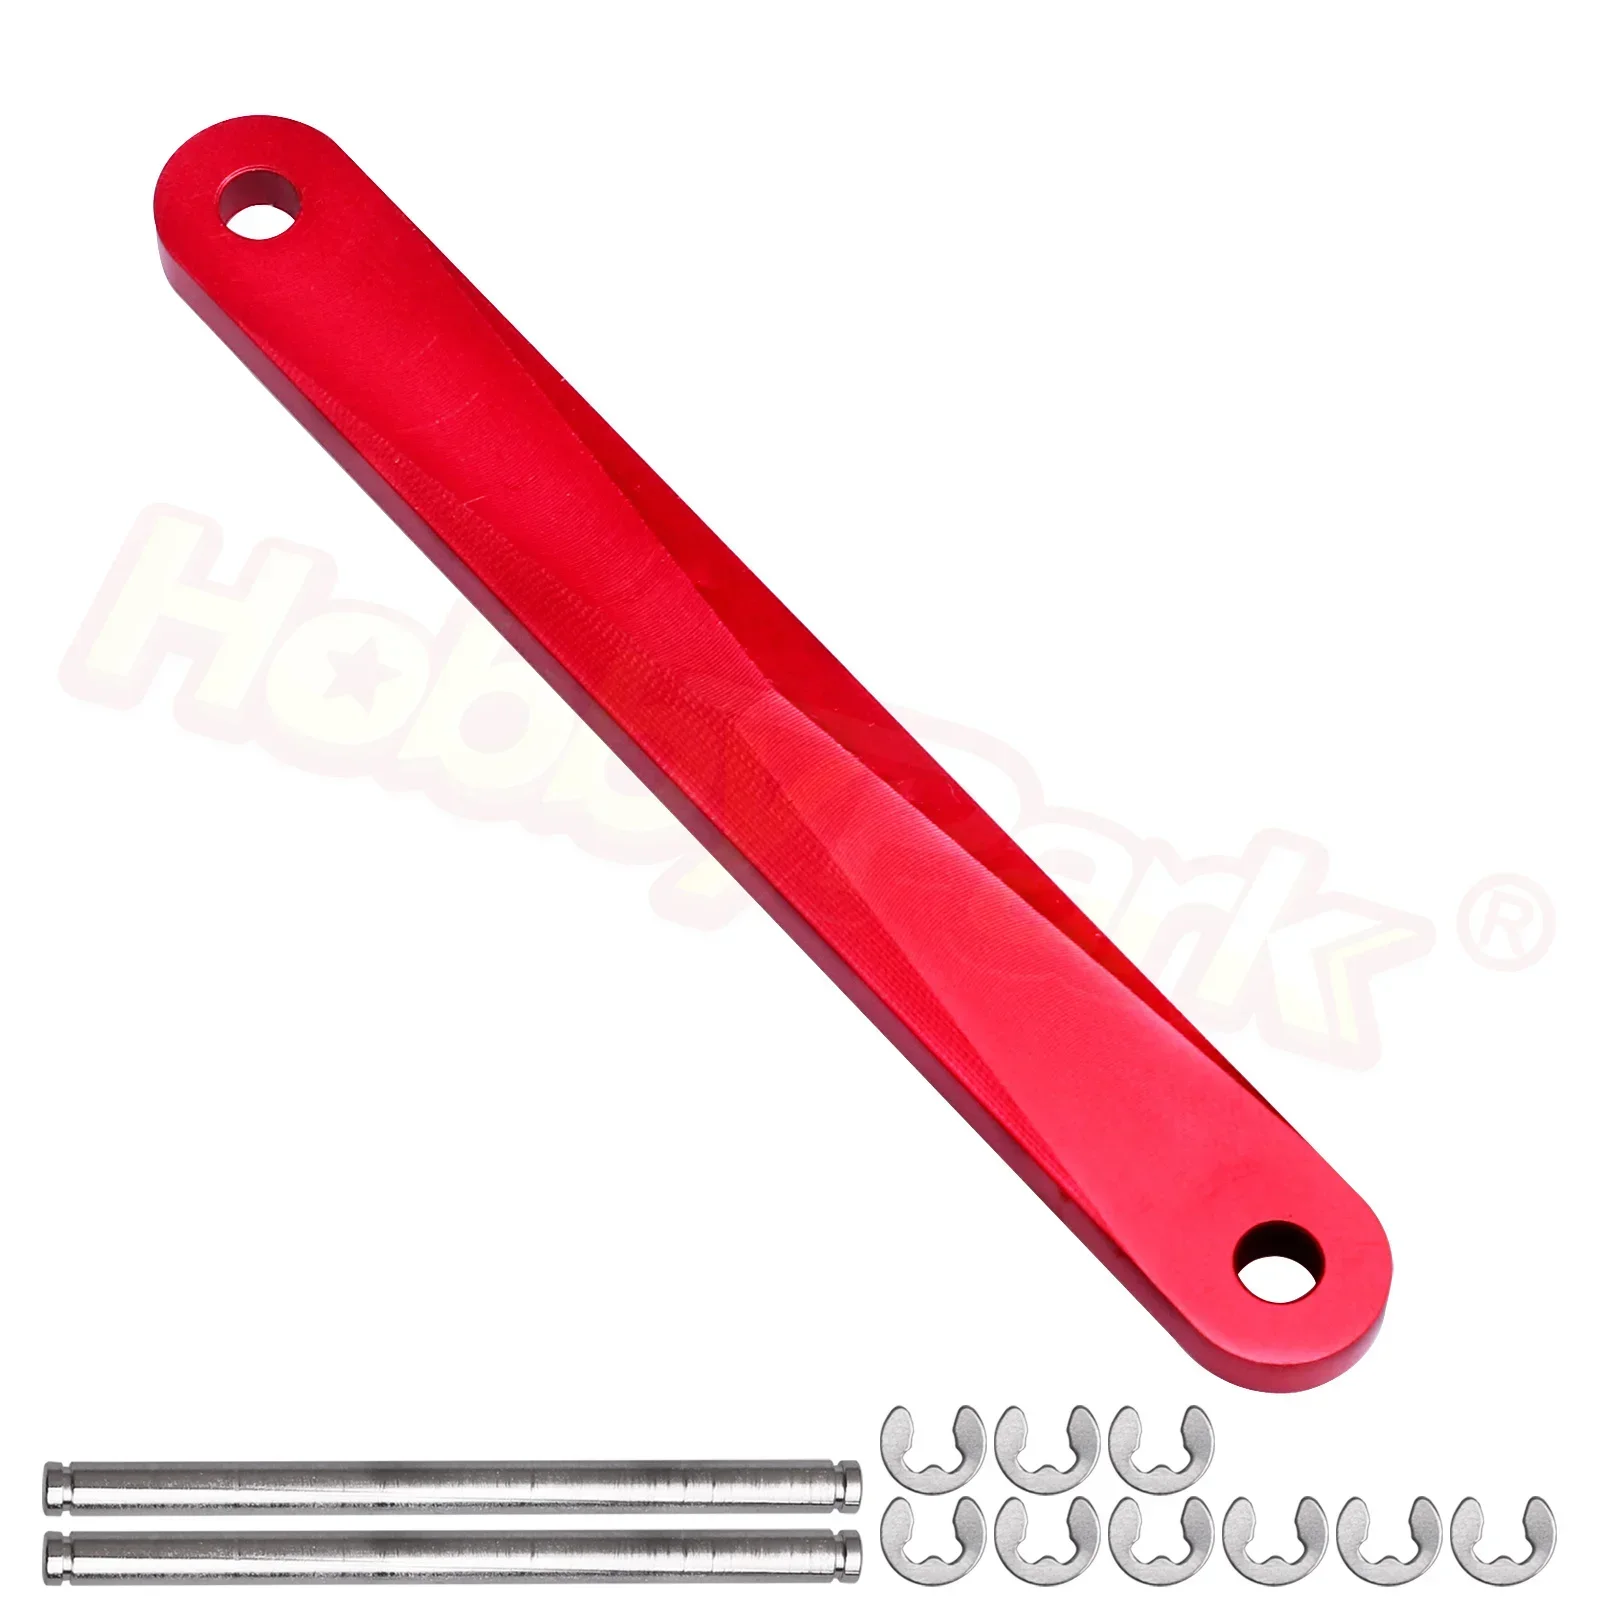 

Aluminum Tie Bar and Suspension Hinge Pins for 1/10 Traxxas Slash 2WD Stampede Rustler VXL Bandit, Replaces 2532 2640 (Red)